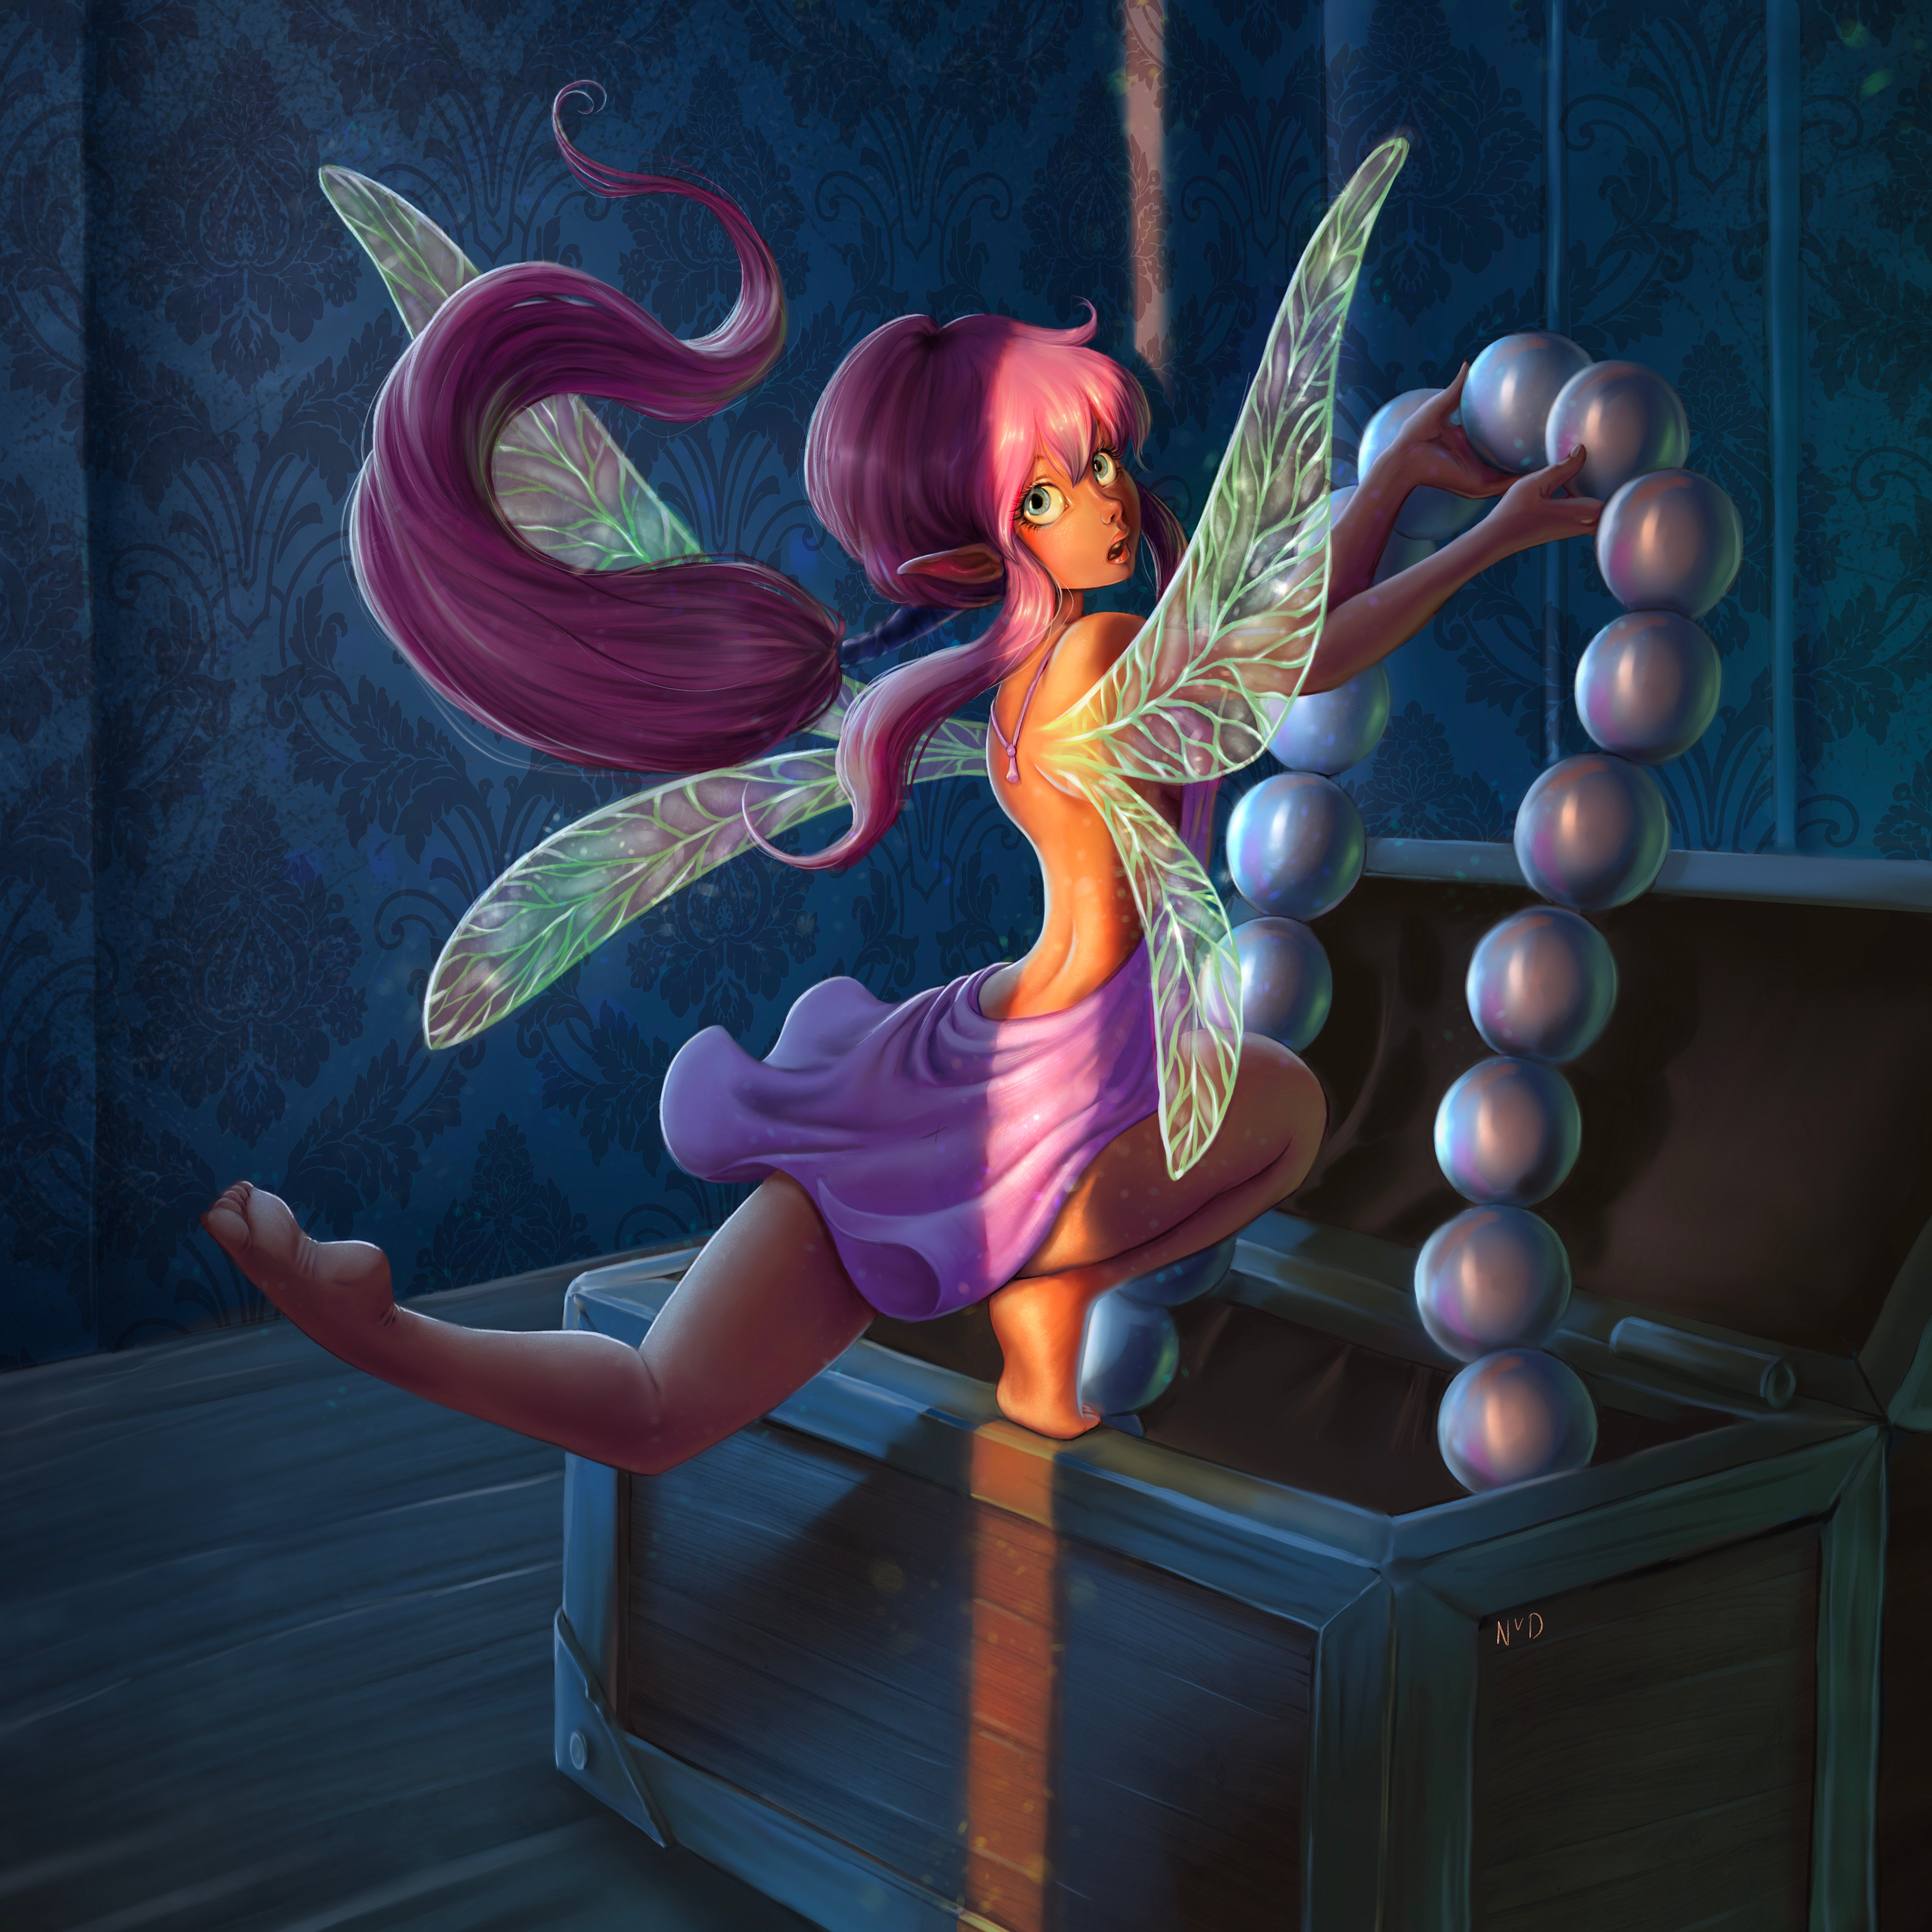 Faerie stealing a pearl necklace